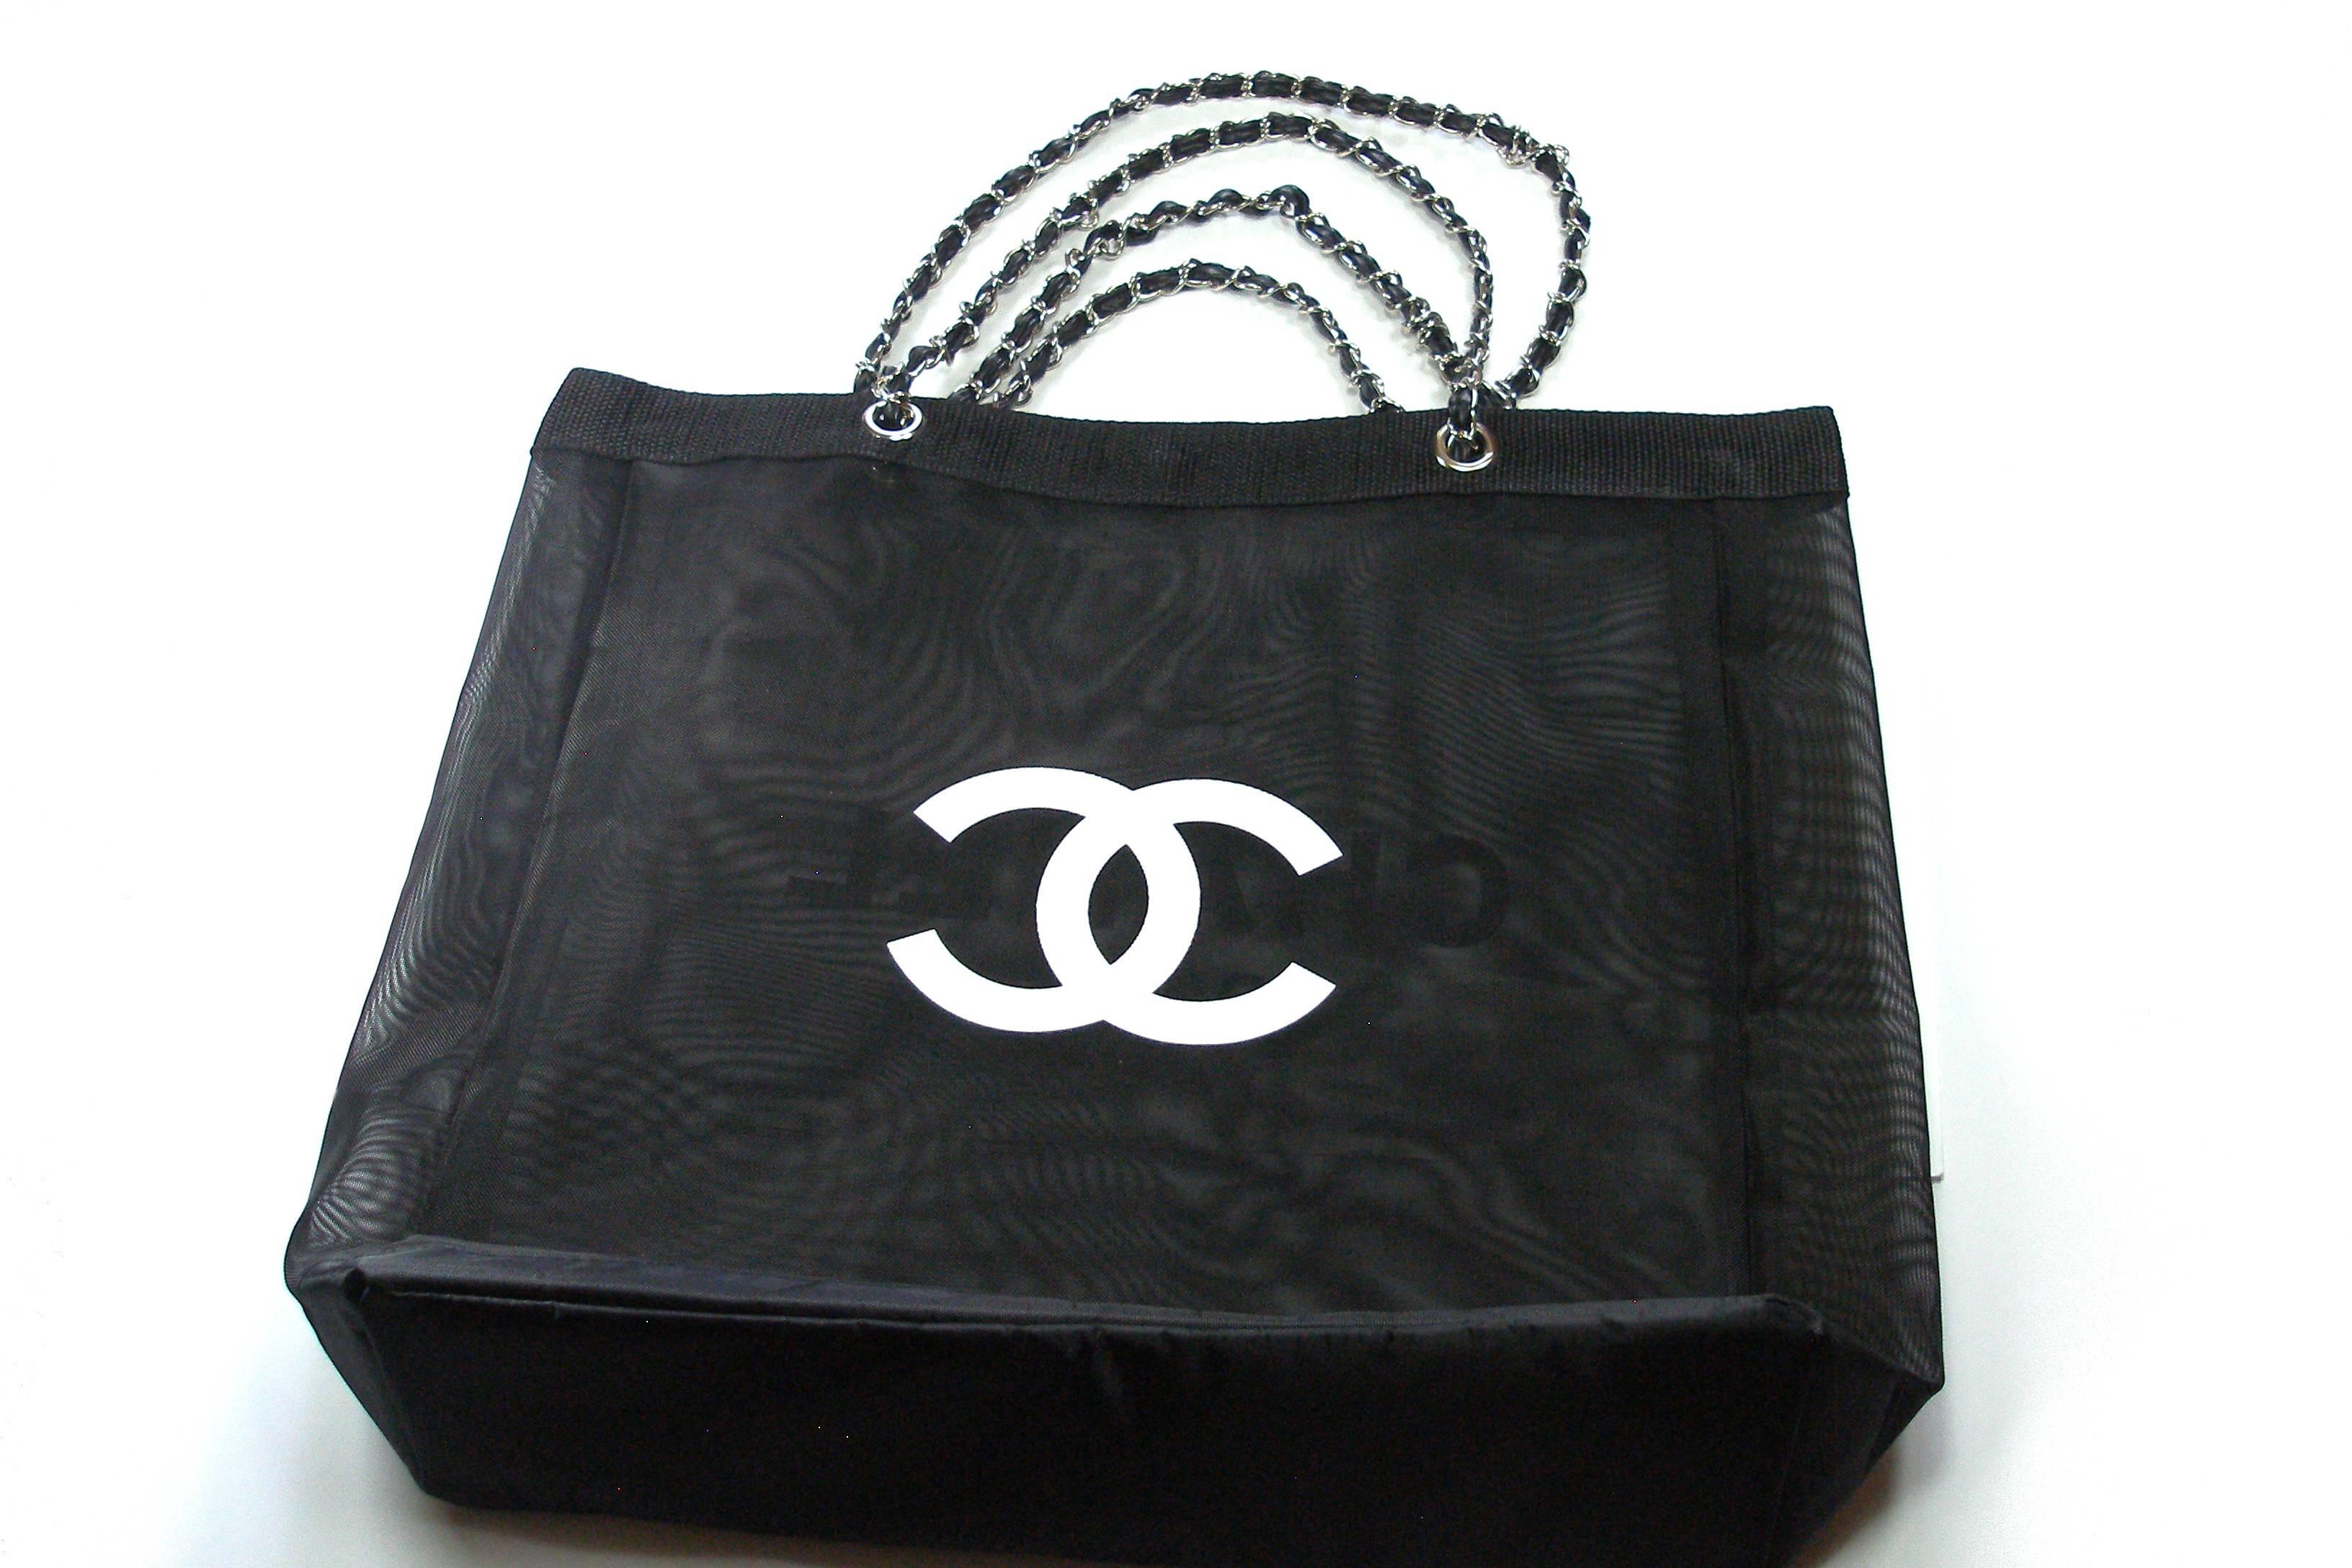 CHANEL VIP Black Mesh Tote Bag Shopping Travel Shopper Leather(Faux Leather) and silver métal chaine .
Size(approx):  36 x 36 x 11 cm 
VIP Customers Gift form beauty counter , not from retail store.
NO DUST BAG OR HOLOGRAM AS THIS IS A VIP GIFT